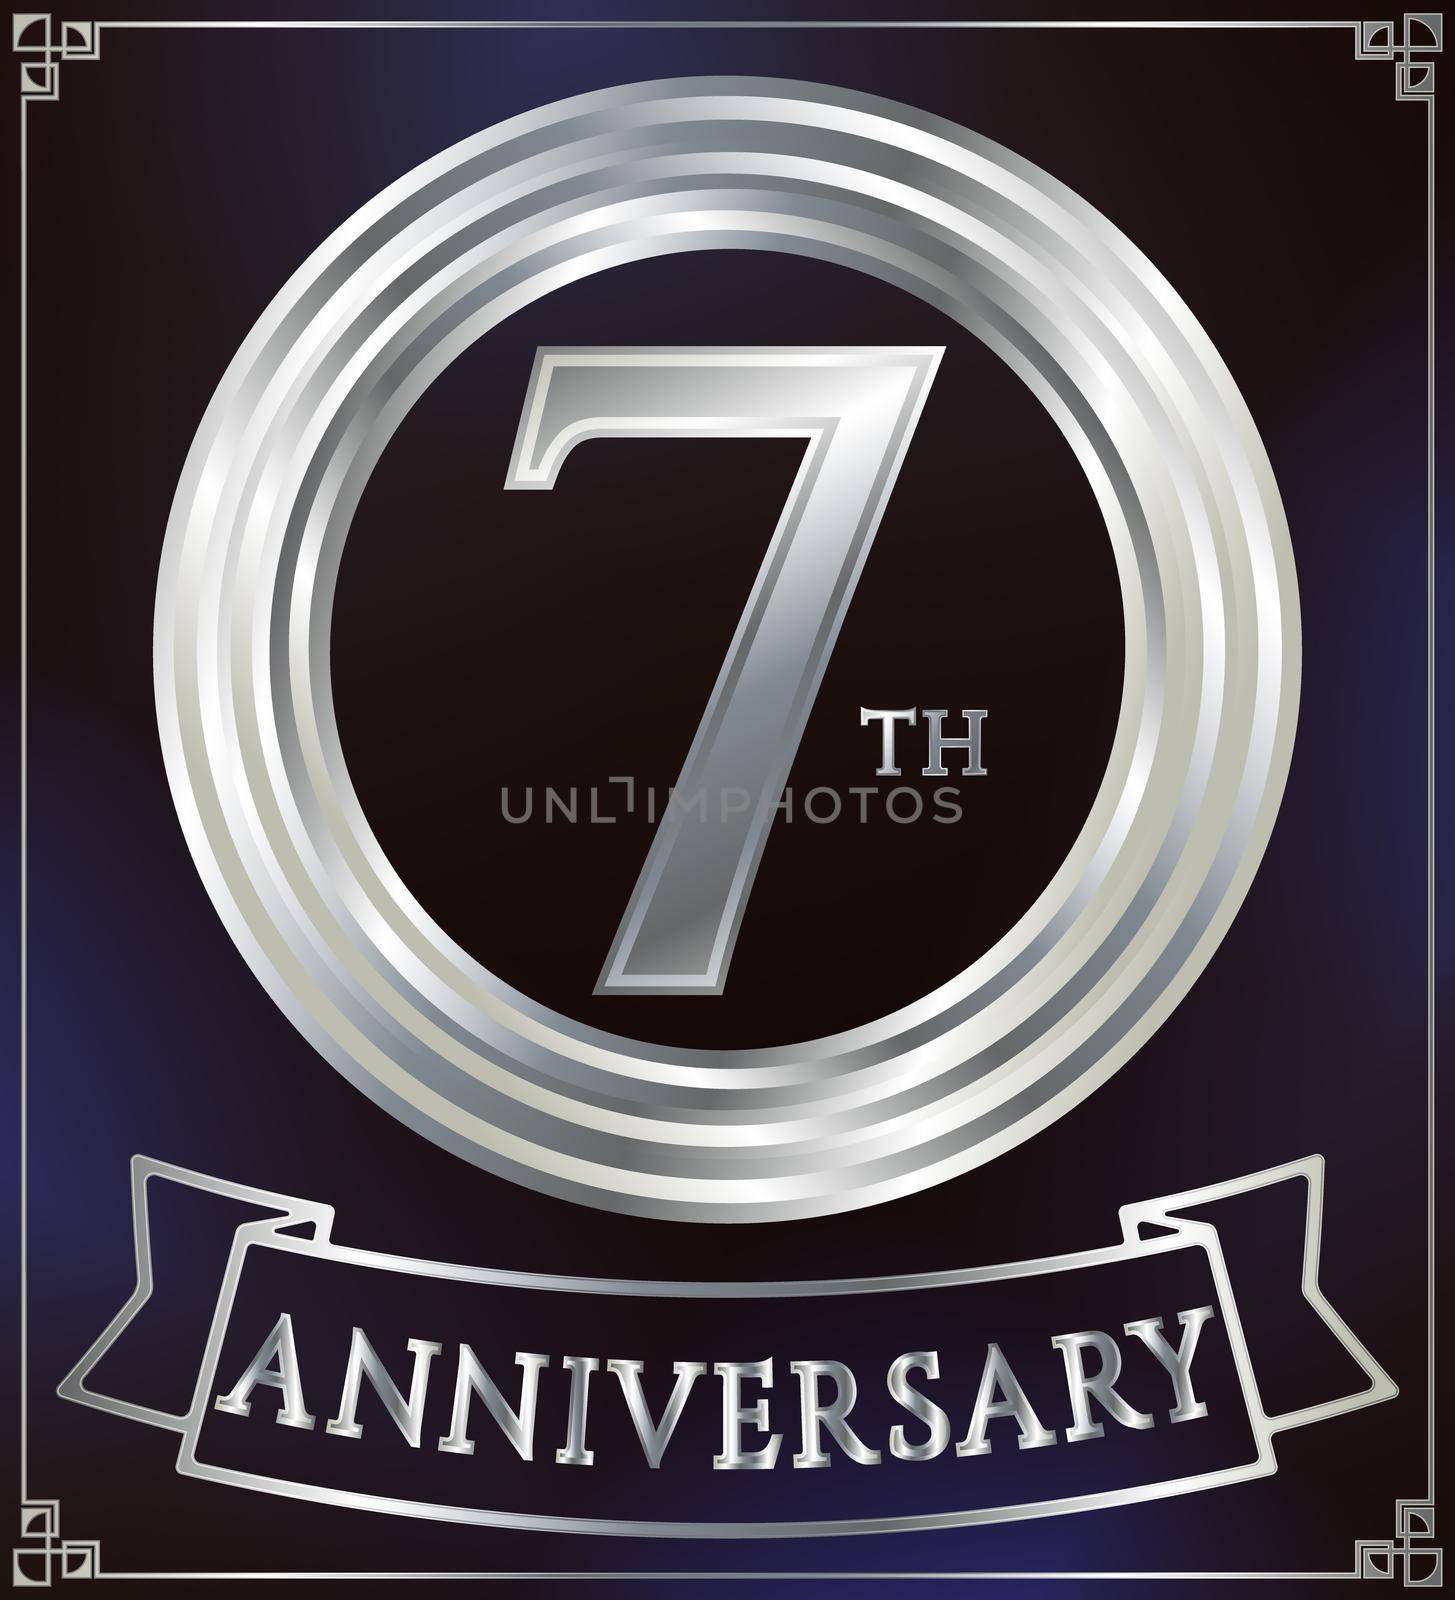 Anniversary silver ring logo number 7. Anniversary card with ribbon. Blue background. Vector illustration.